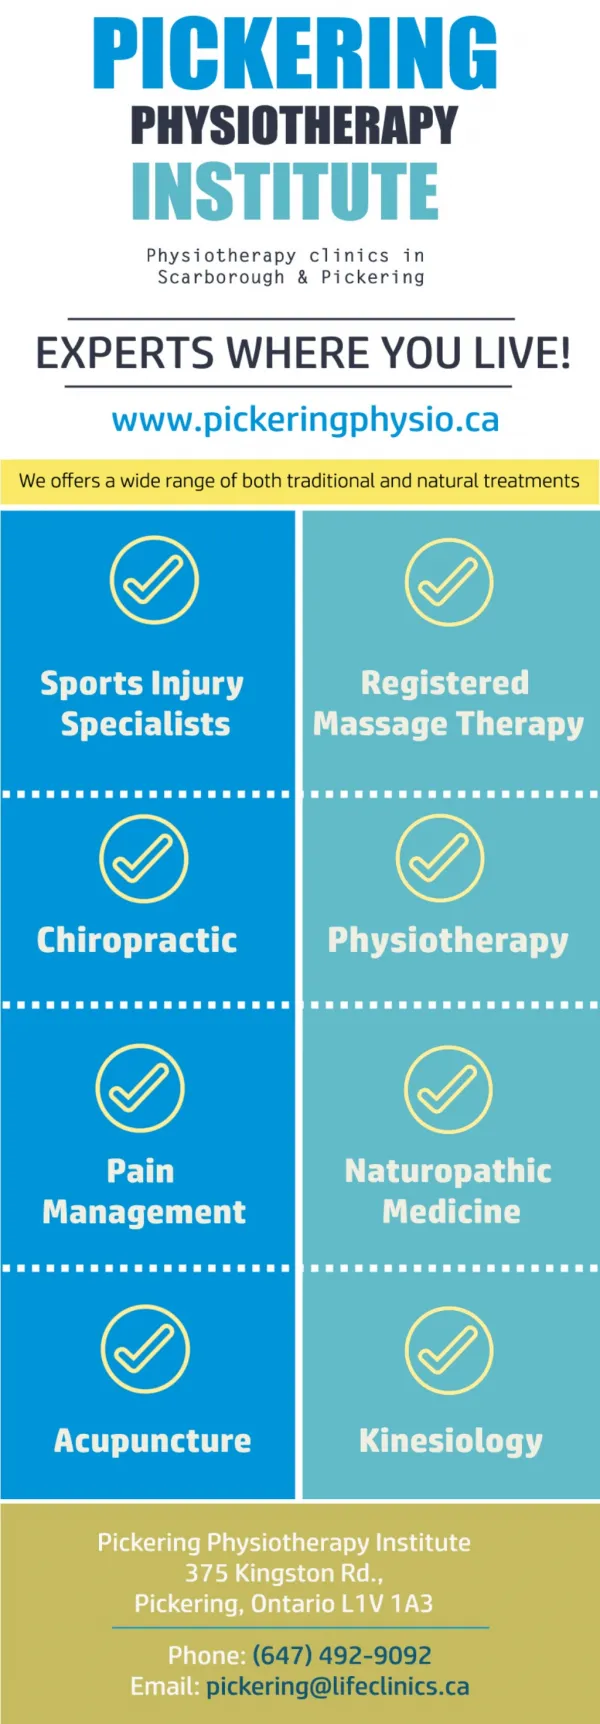 Best Physiotherapy Institute in Pickering and Scarborough